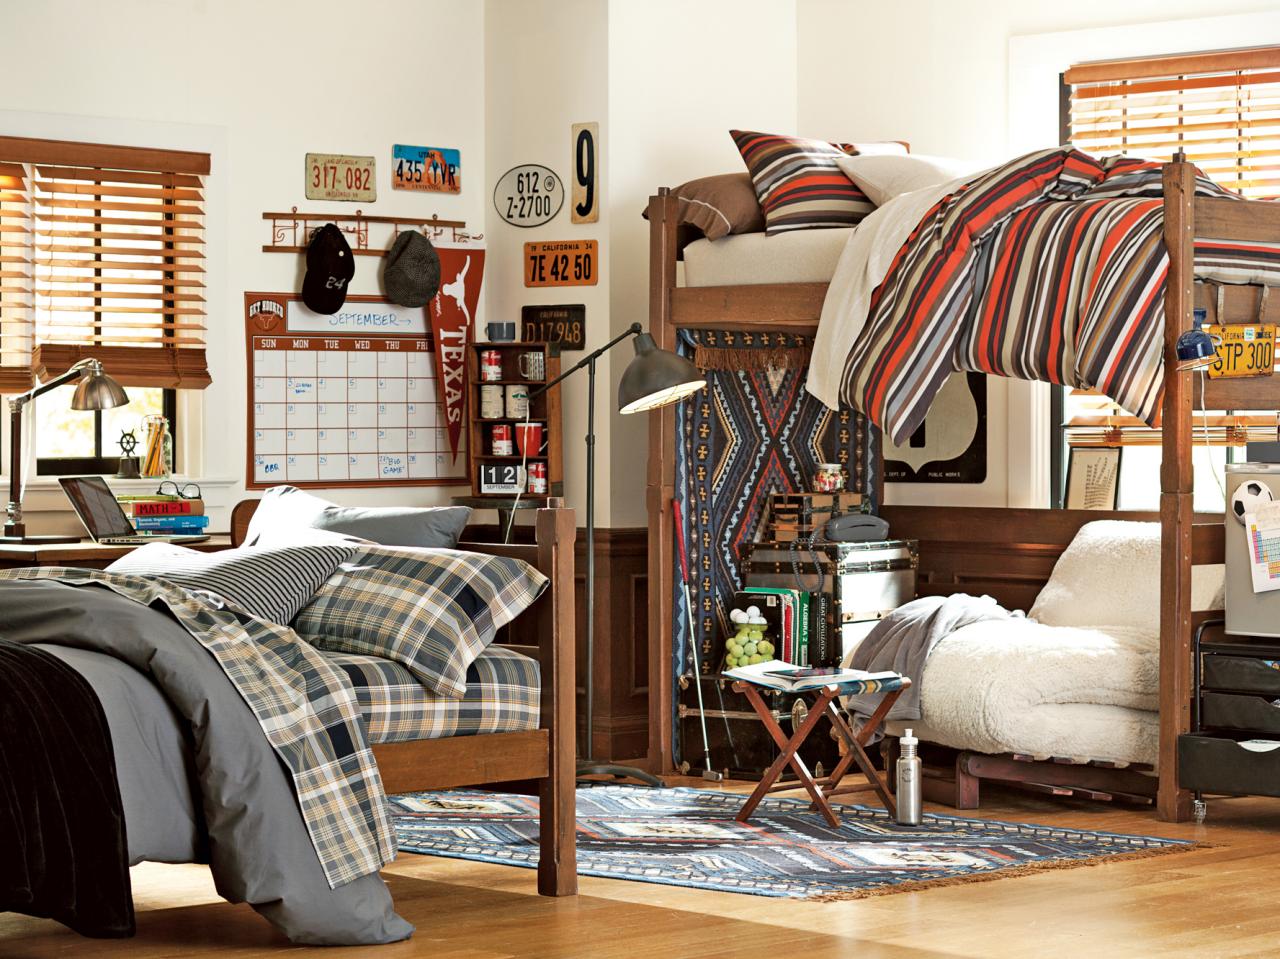 Bedroom Decorating Ideas For College Guys